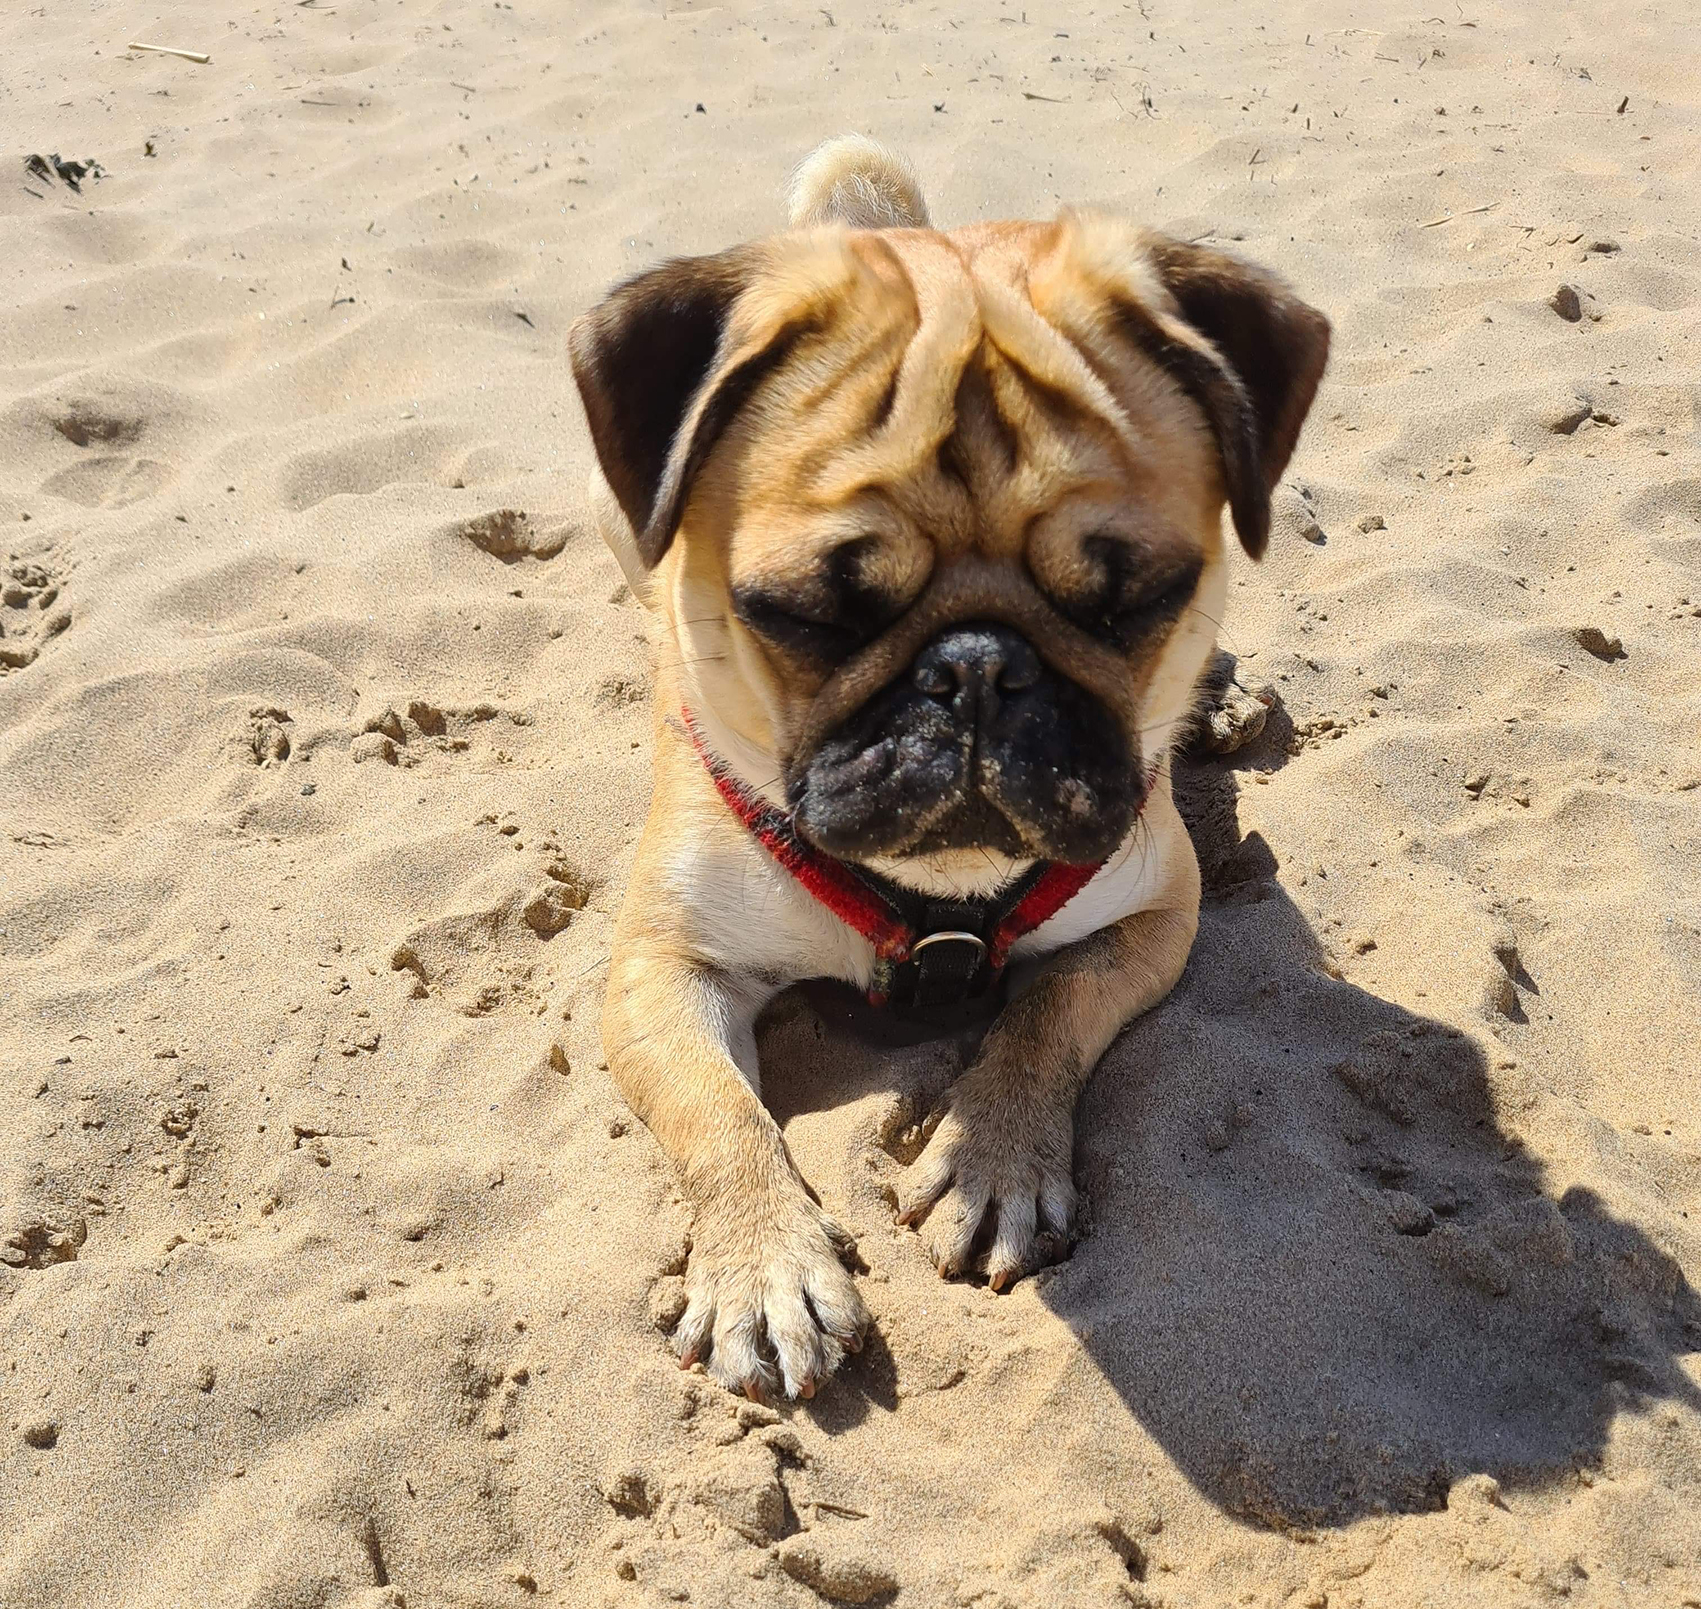 Wheels for Carletto - image Beau on https://pugprotectiontrust.org